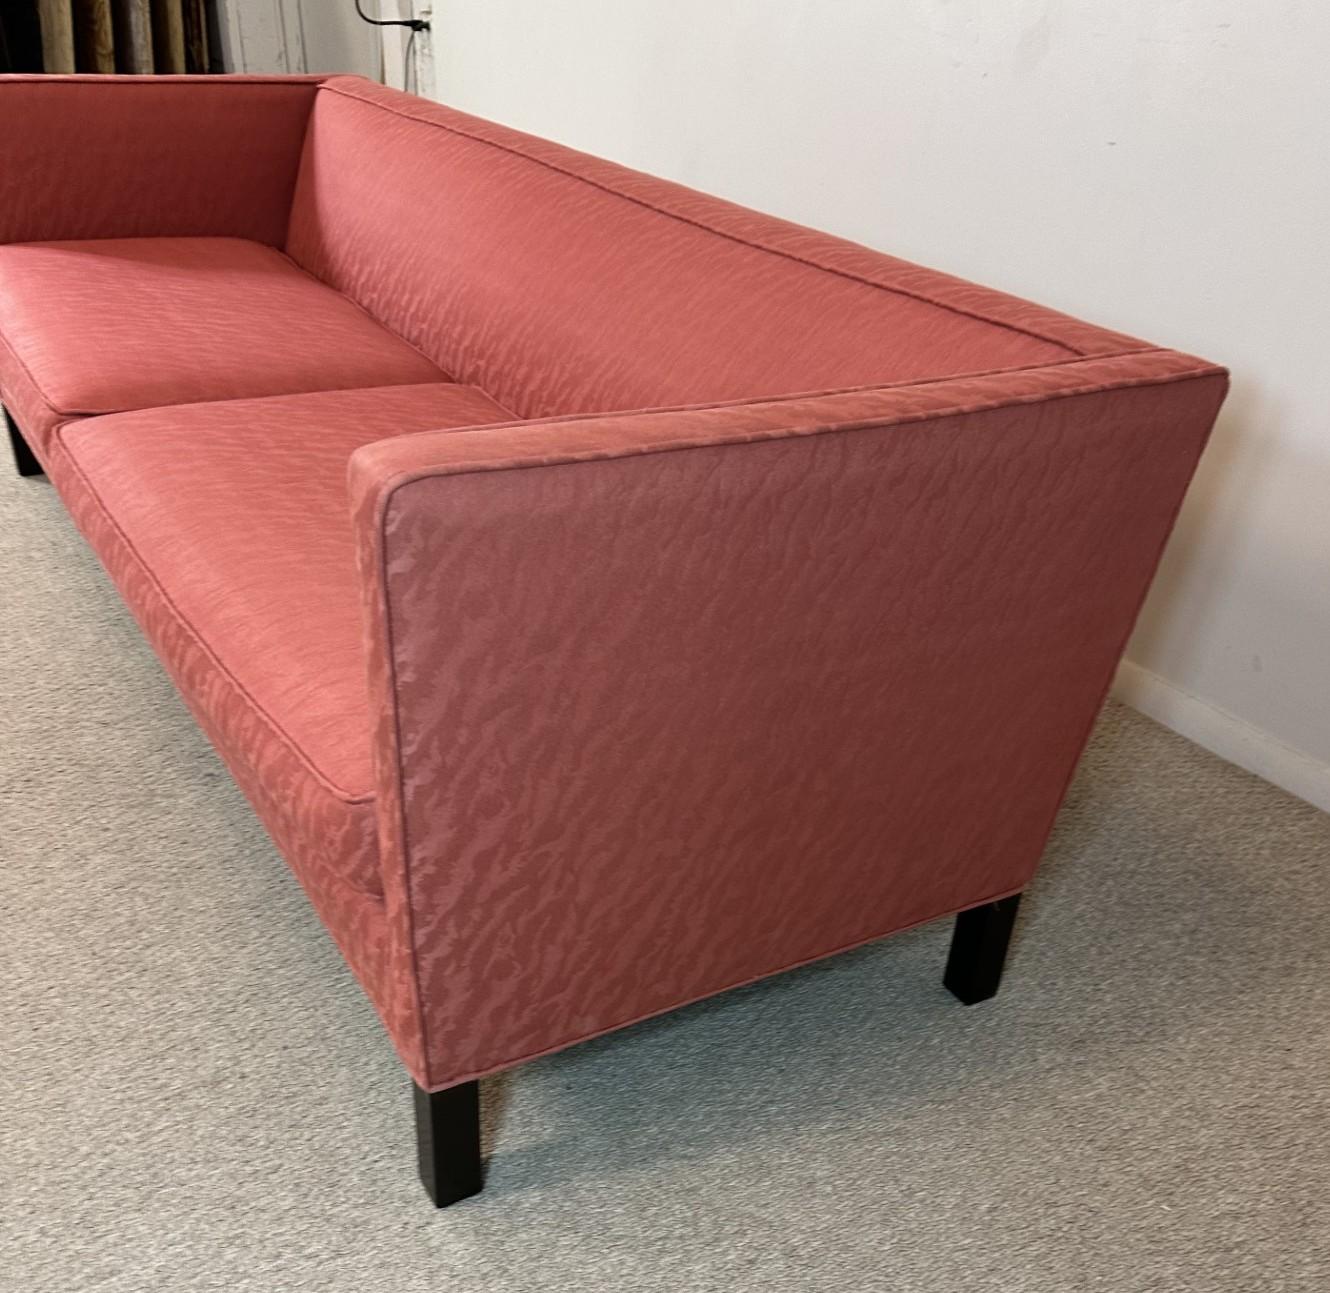 Dunbar Tuxedo Sofa in unique and stylish salmon color. Good shape but could be recovered; has minor sunfade. 84 1/2